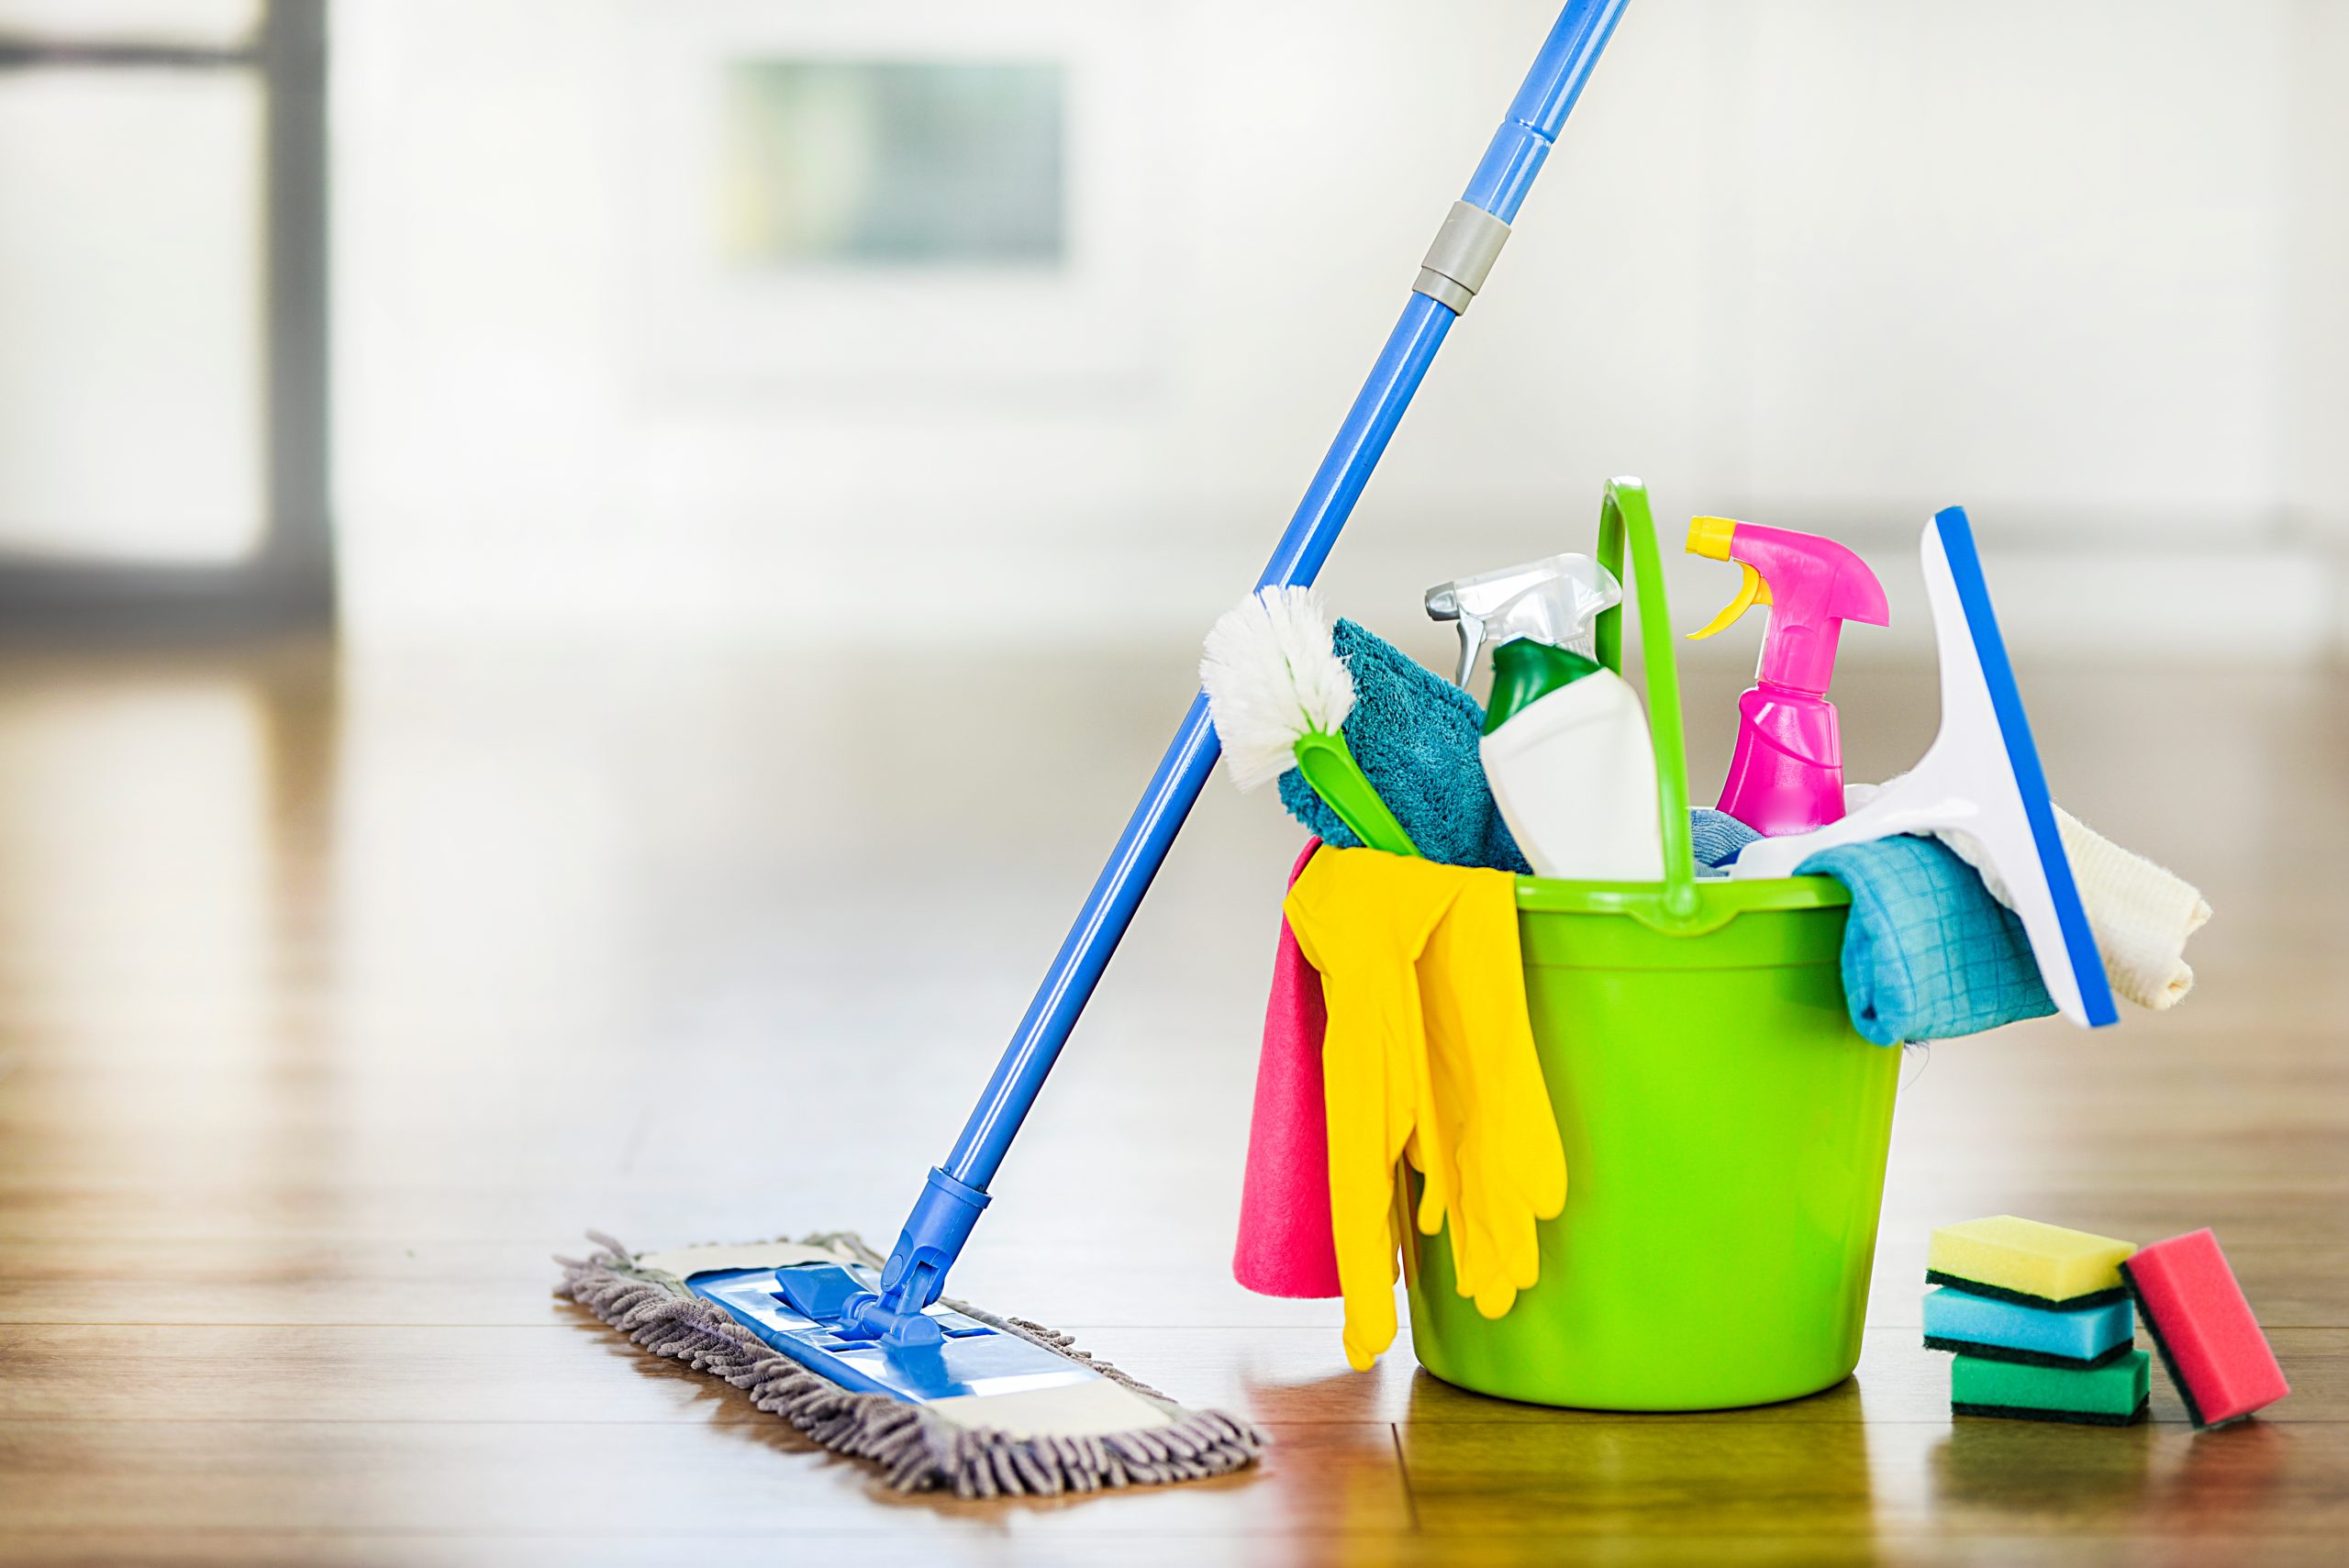 faq - fussy - Who needs house cleaning services?